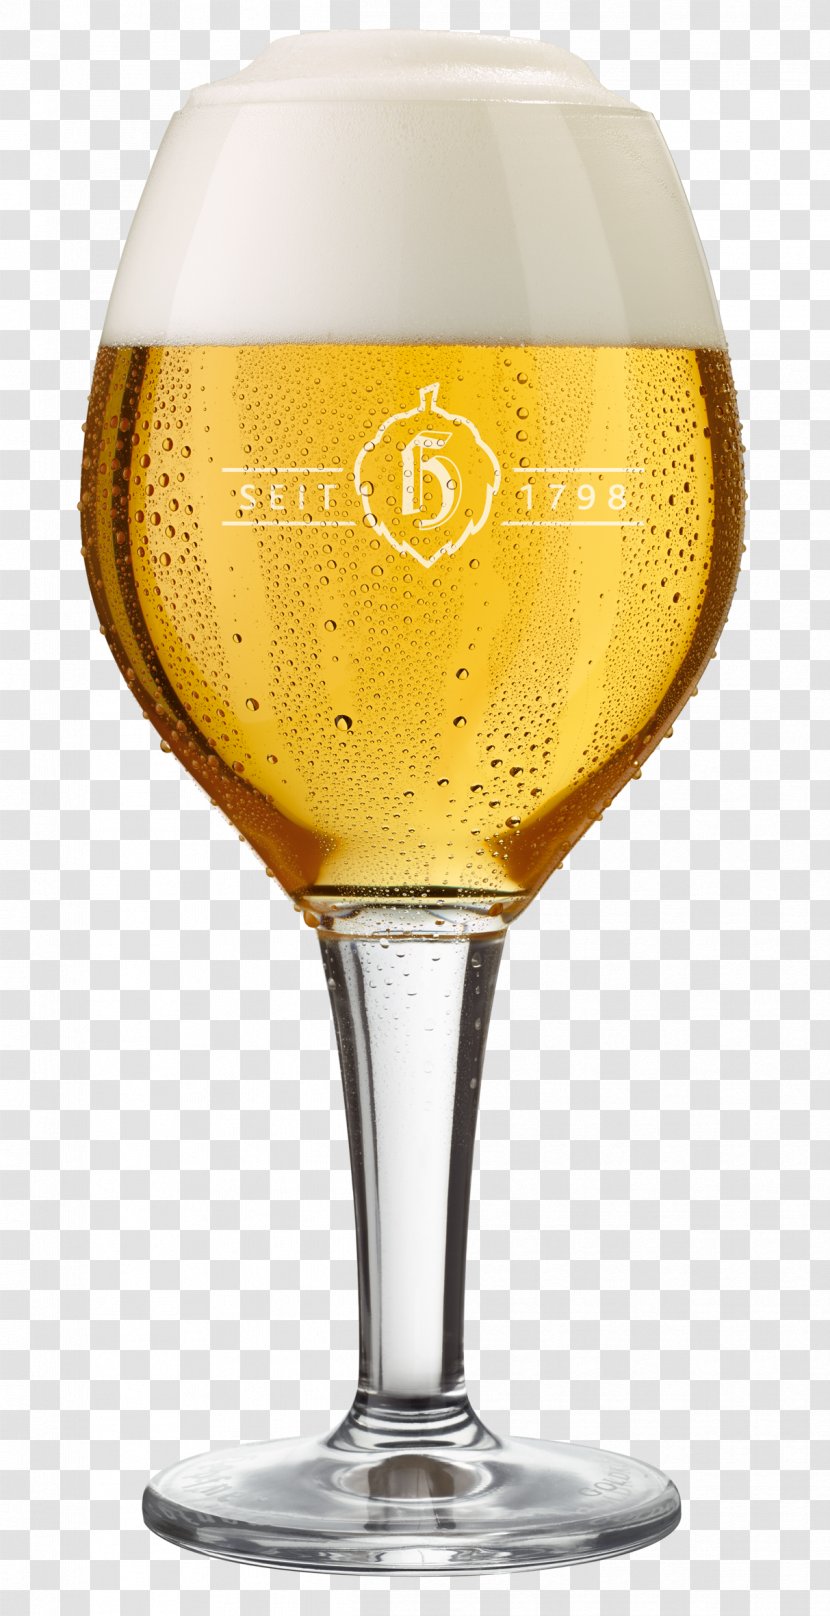 Wine Glass Beer Imperial Pint Champagne - Tableware - Marketing Materials Transparent PNG